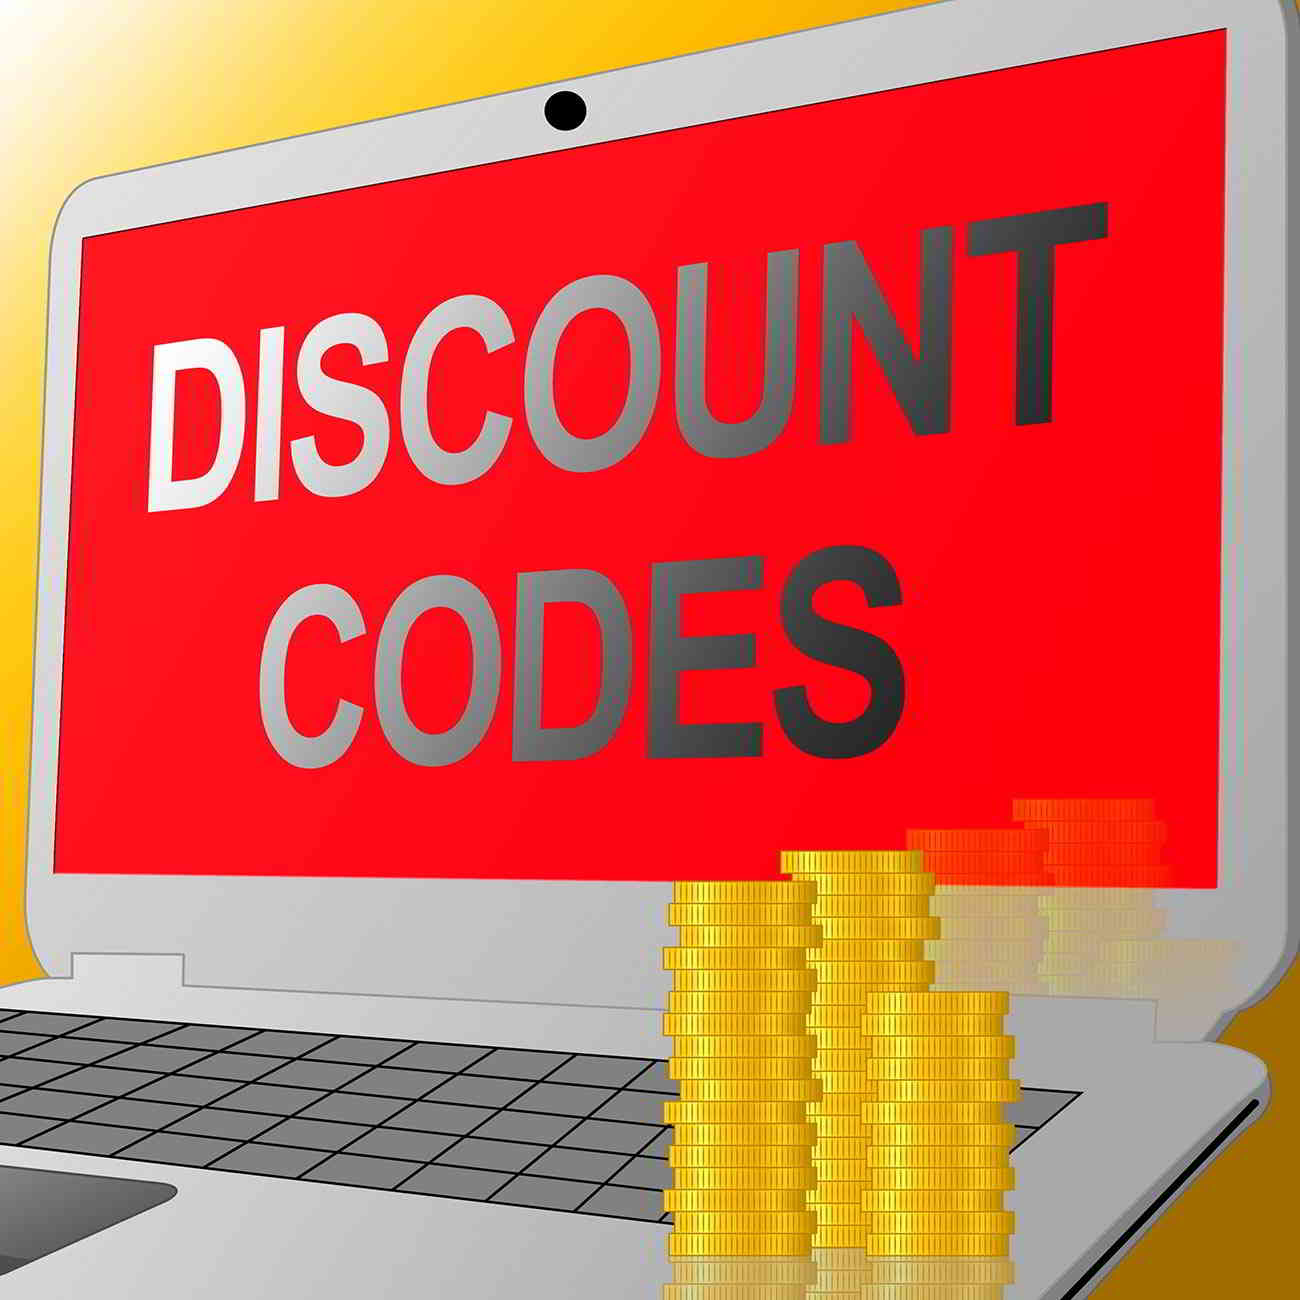 discount codes on computer screen